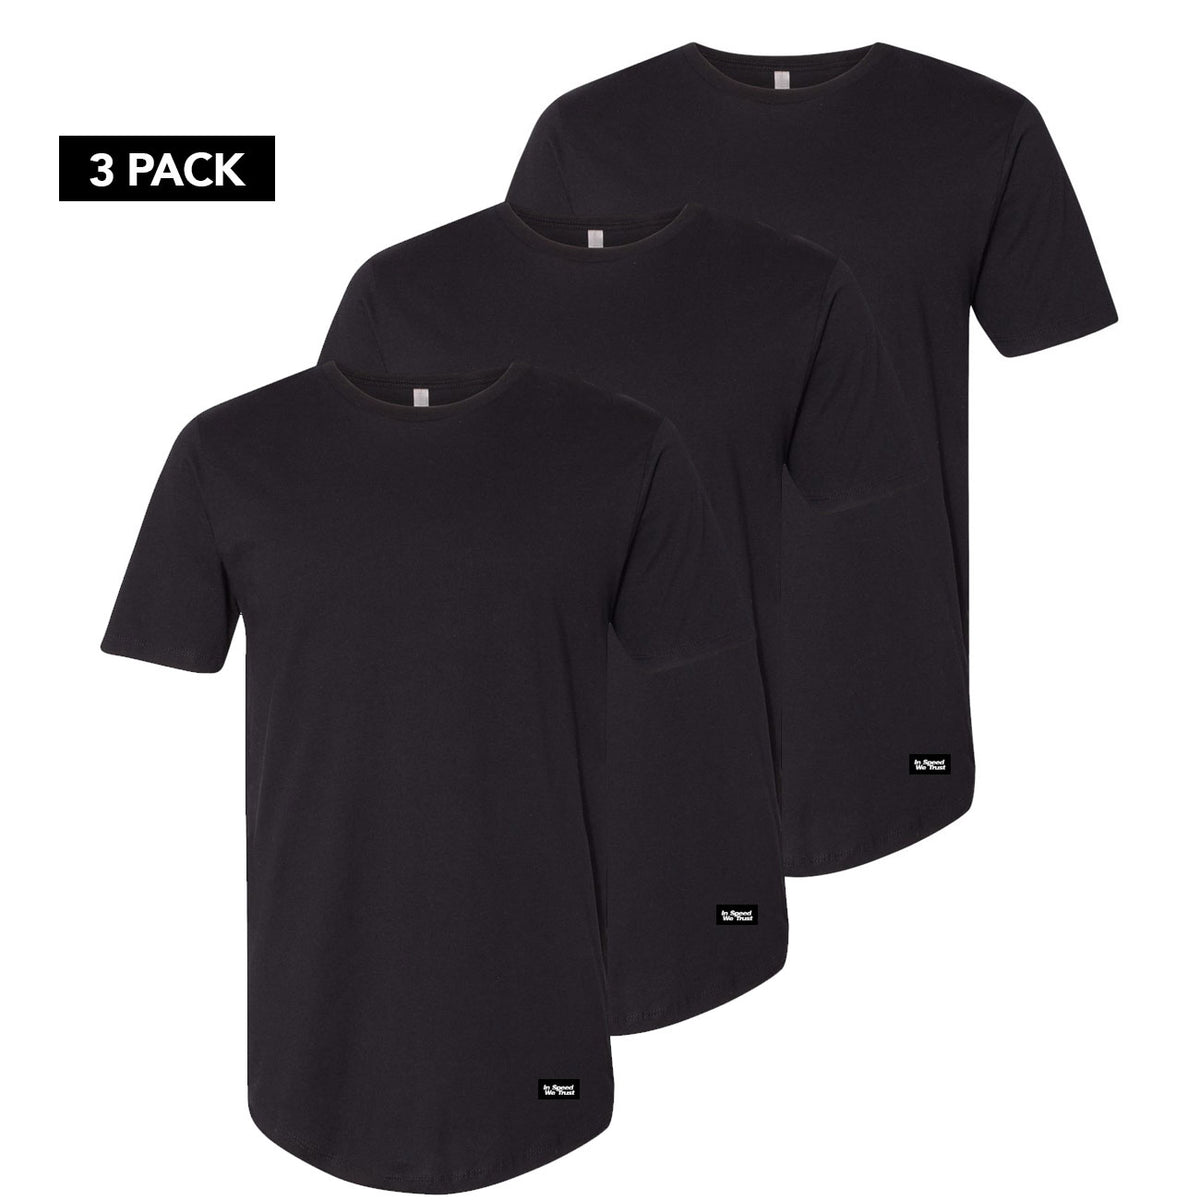 STRONG PACK TEE BLACK s ours - beaconparenting.ie